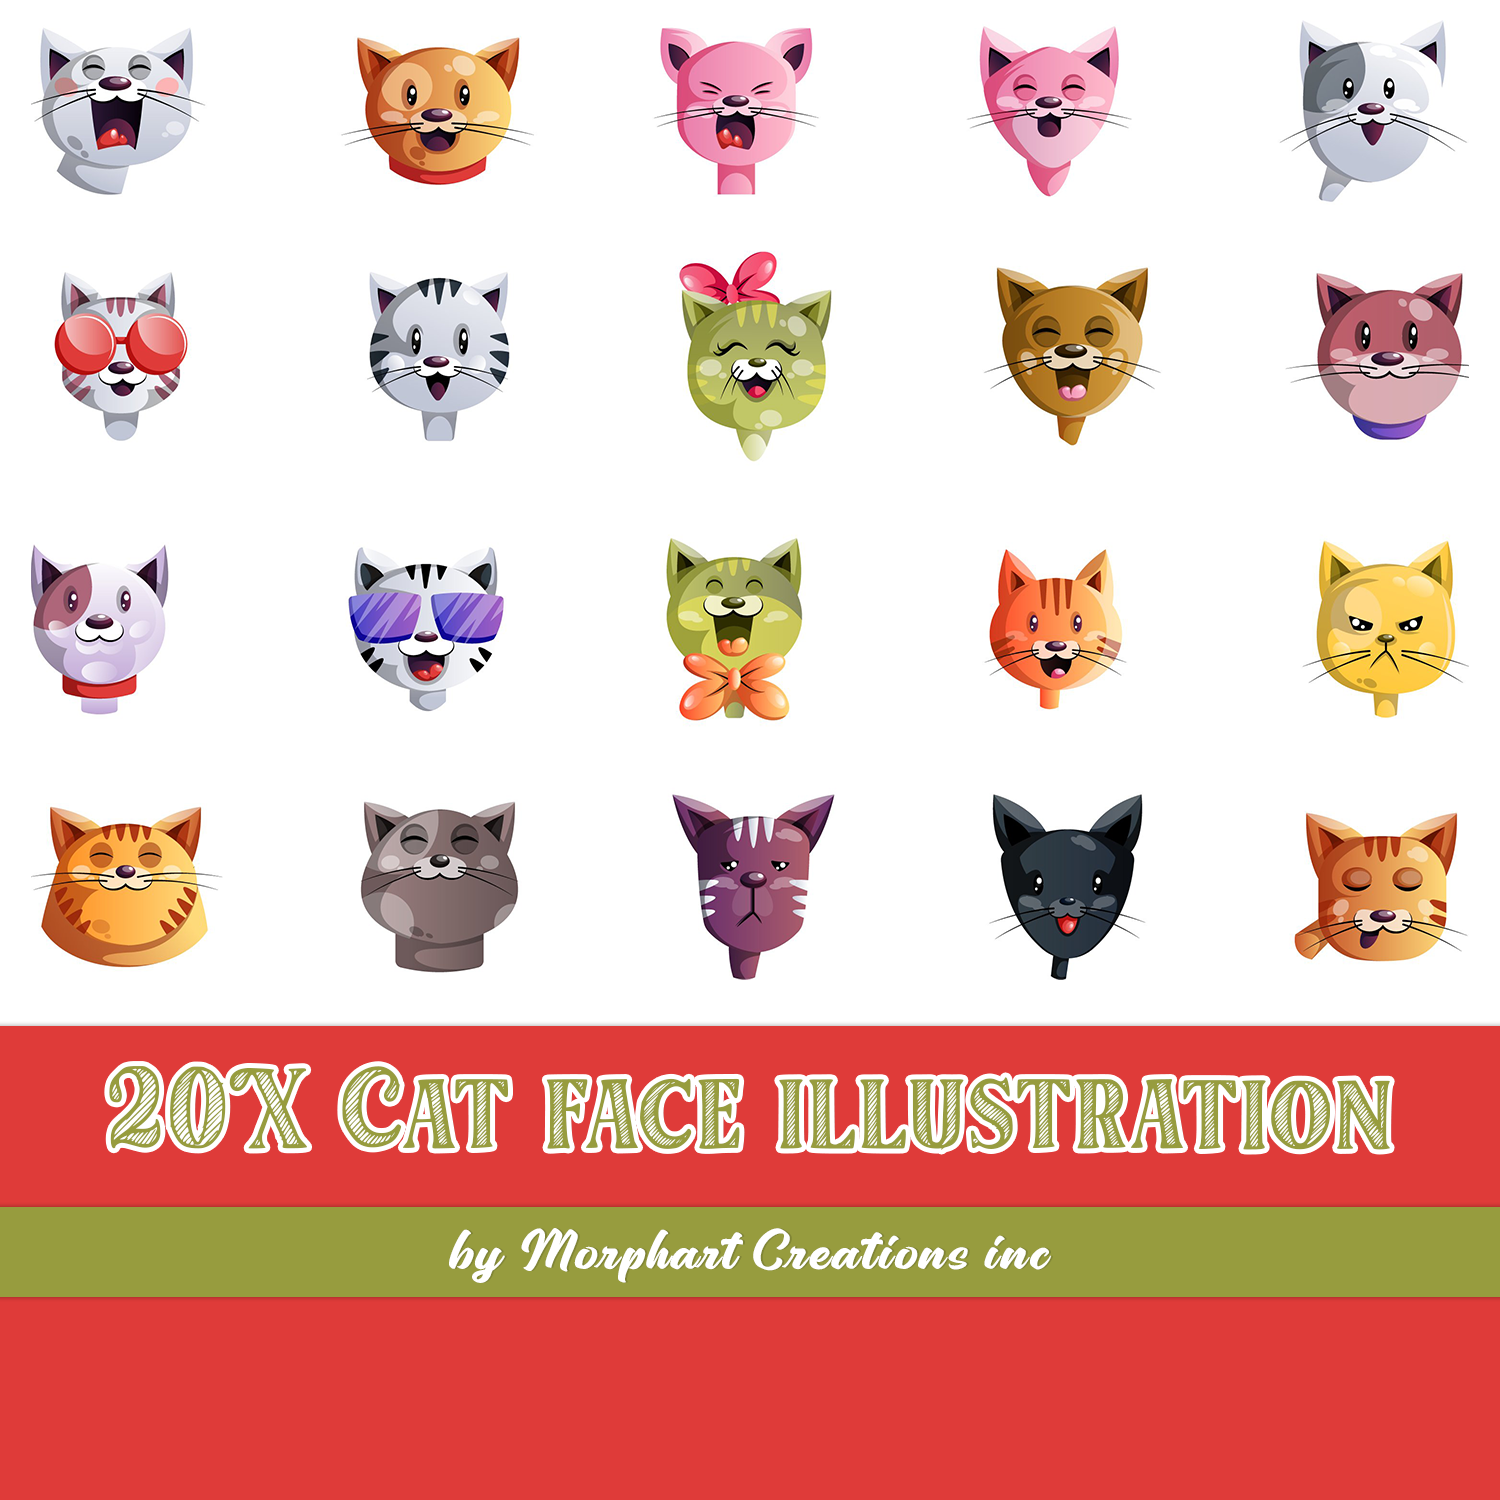 Preview cat face illustration.